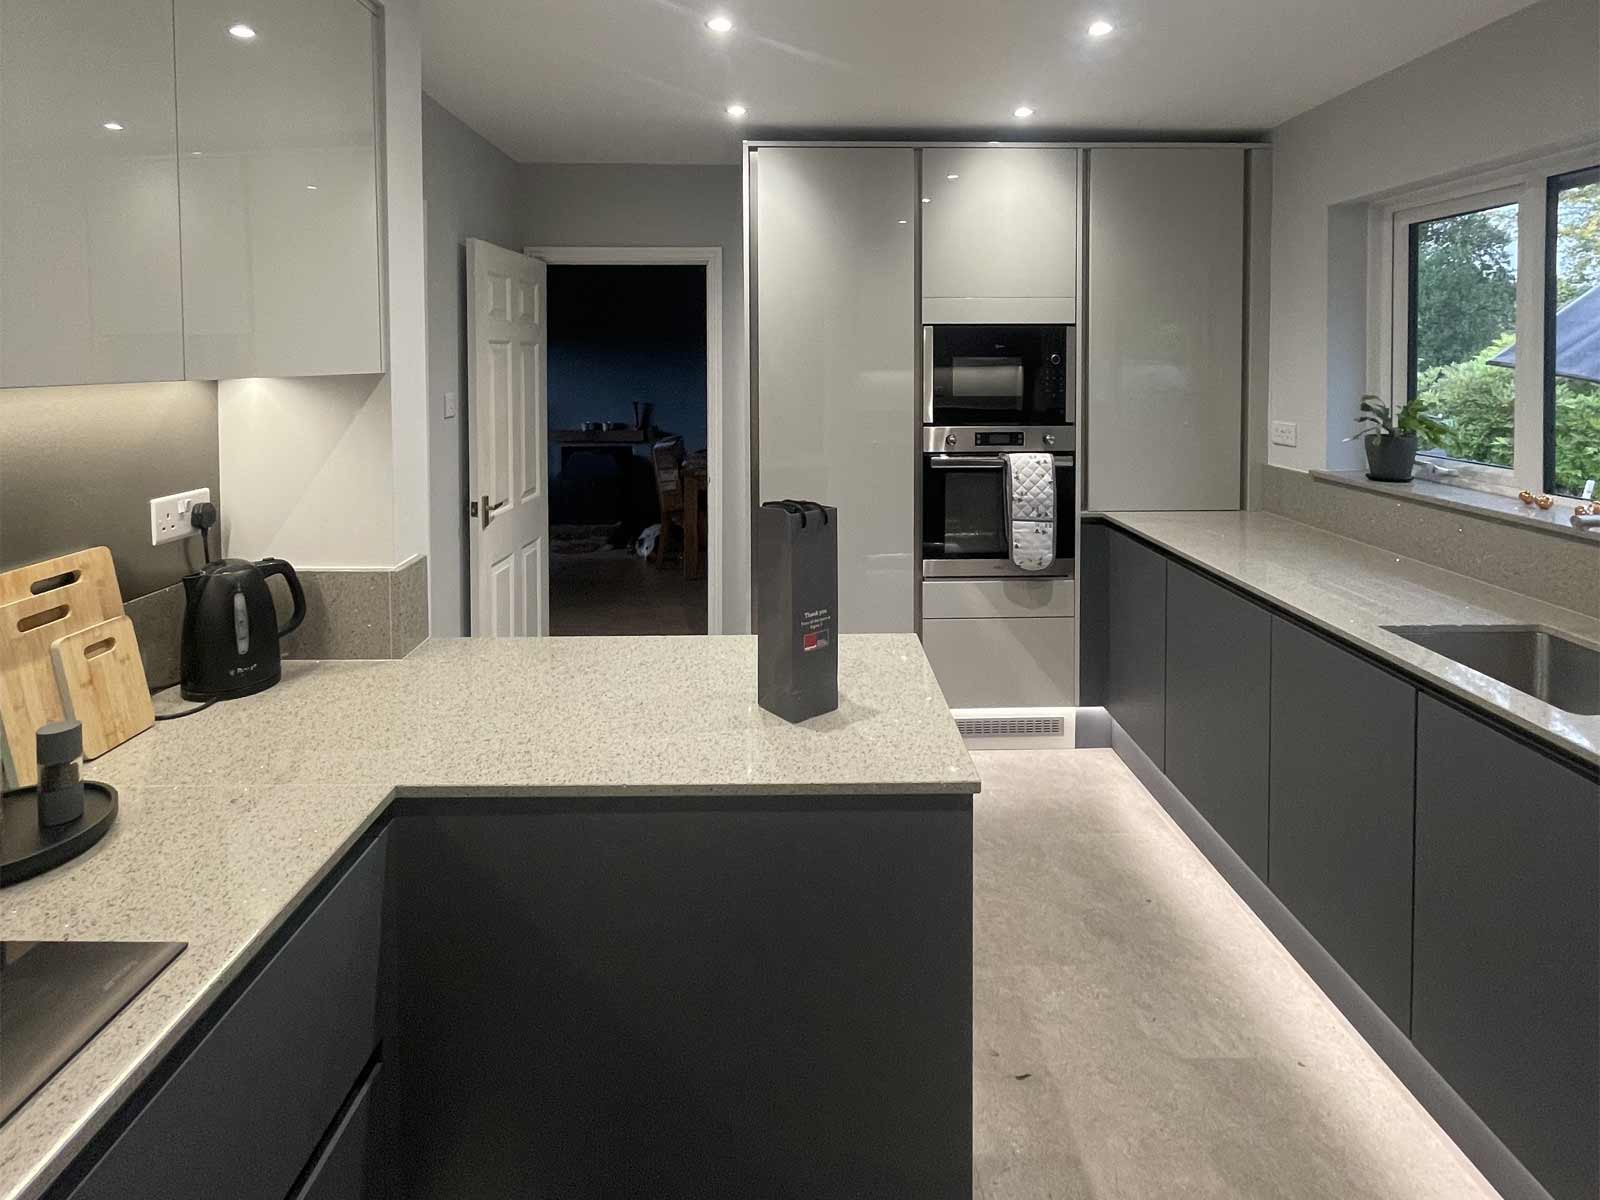 A kitchen with built-in kitchen appliances, including a microwave and oven